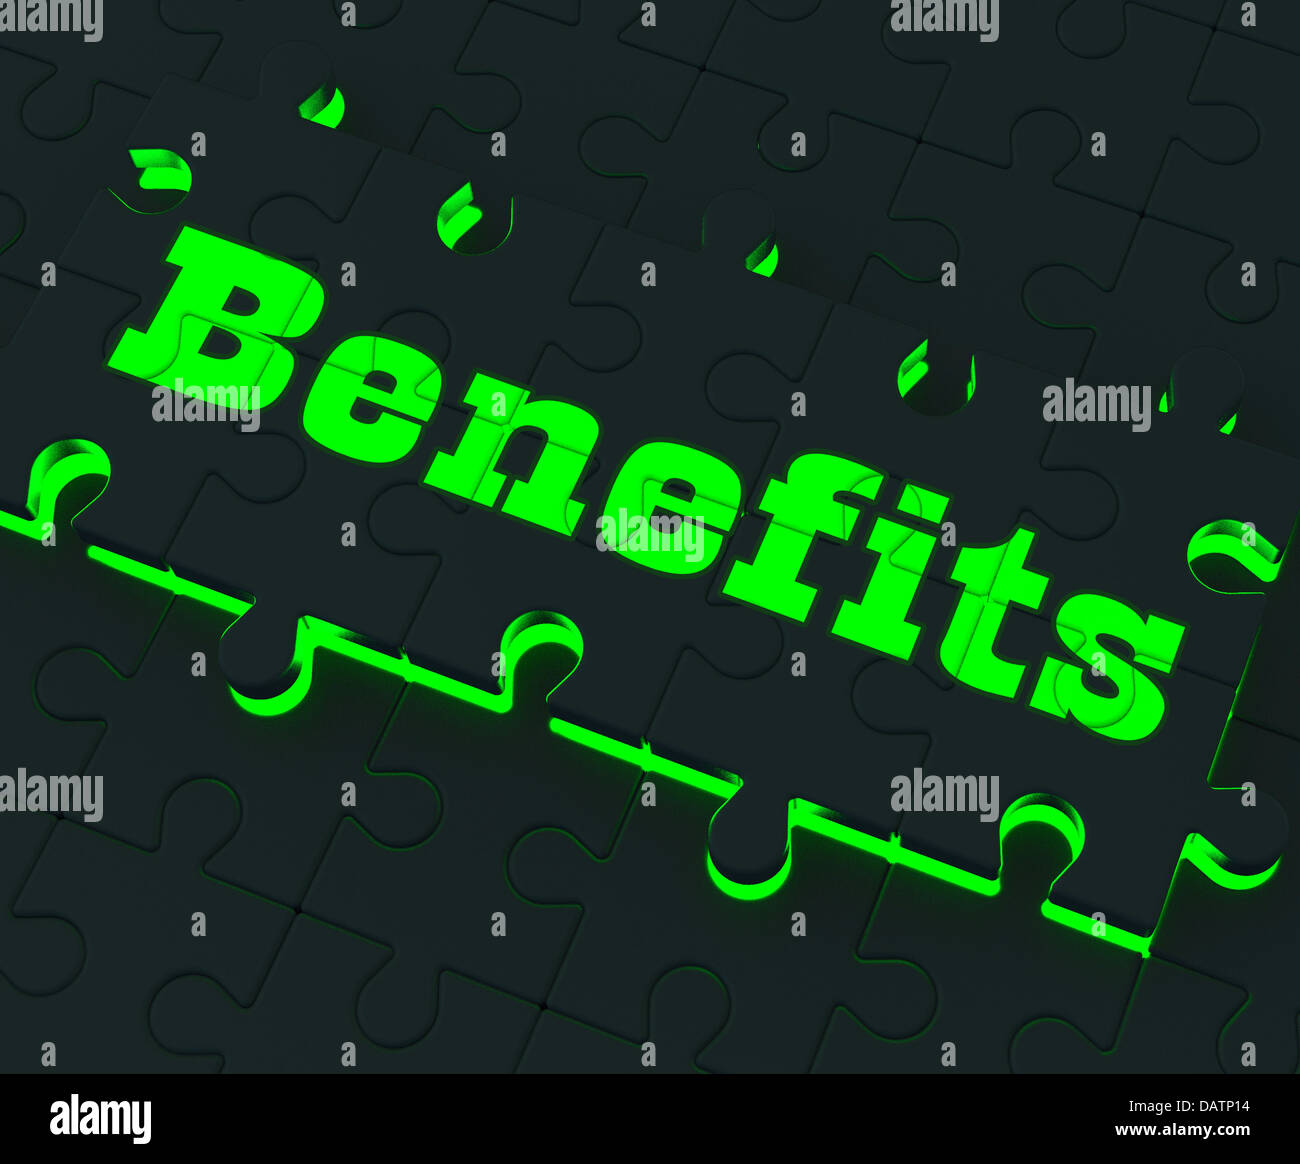 Benefits Puzzle Showing Monetary Compensation Stock Photo